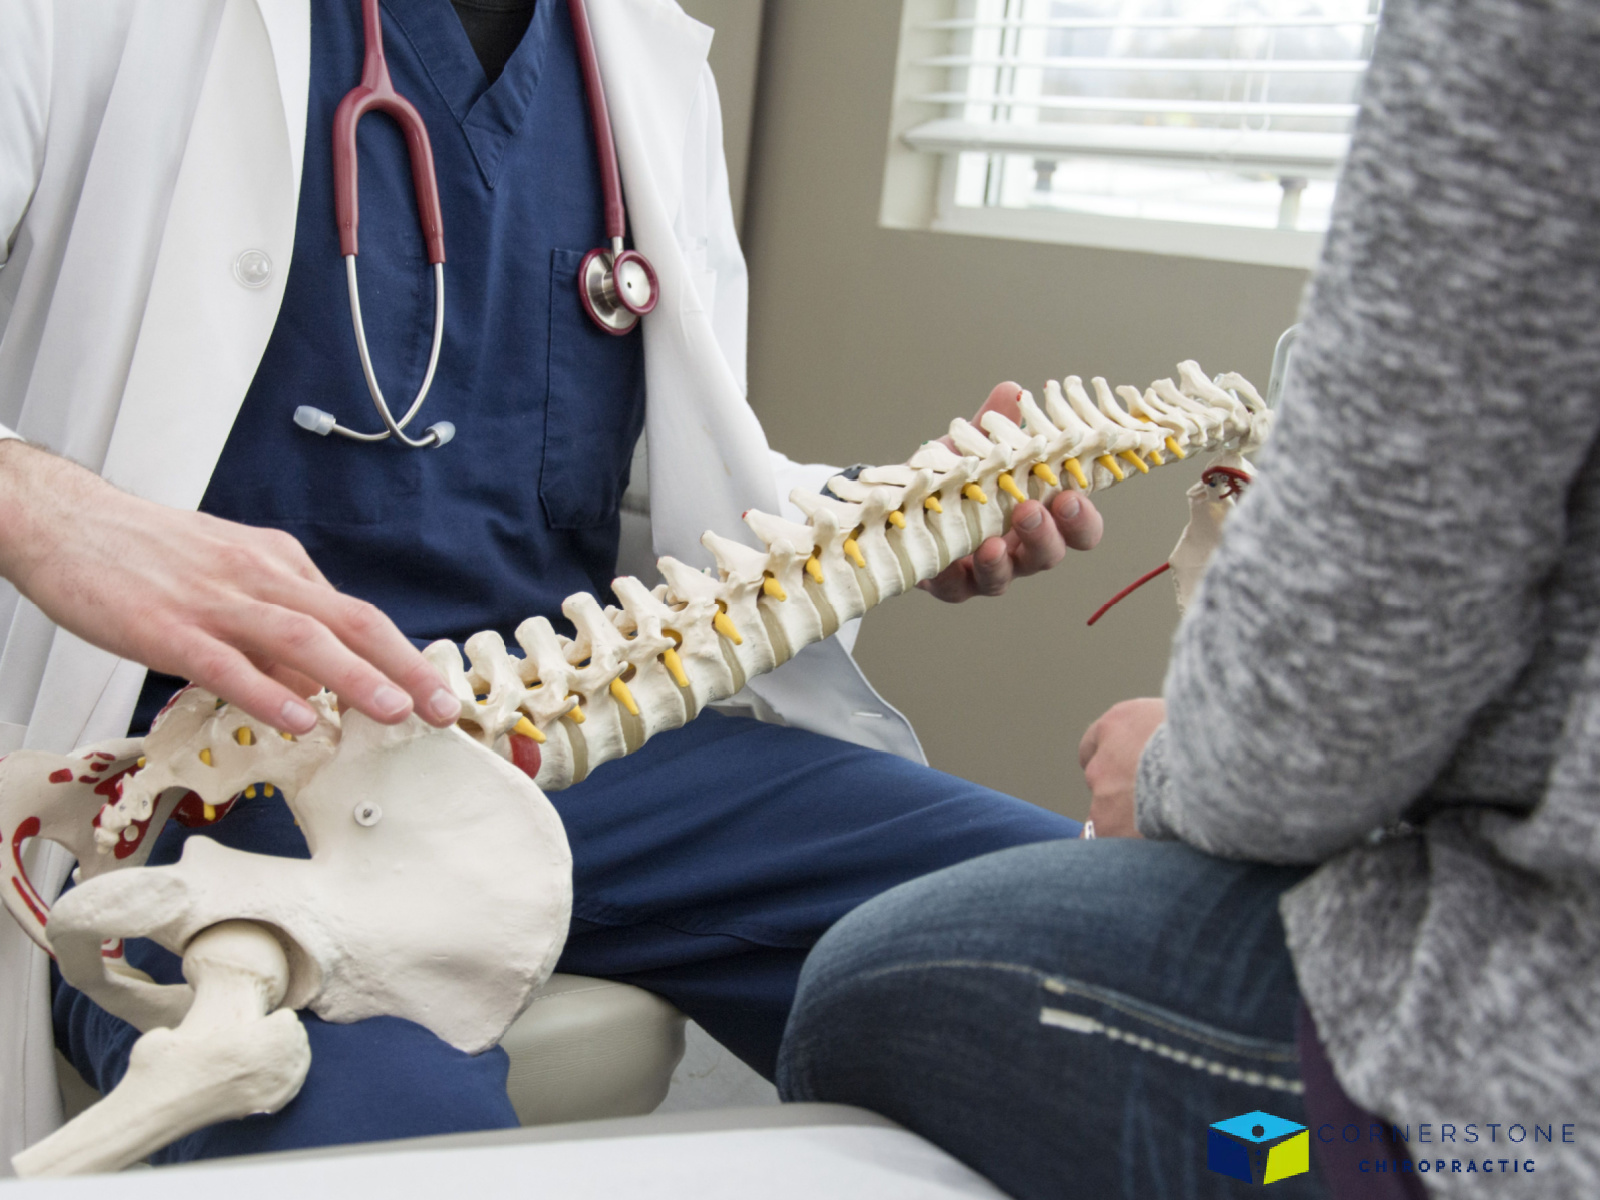 Tailored Chiropractic Care for a Personal Injury at Cornerstone Chiropractic